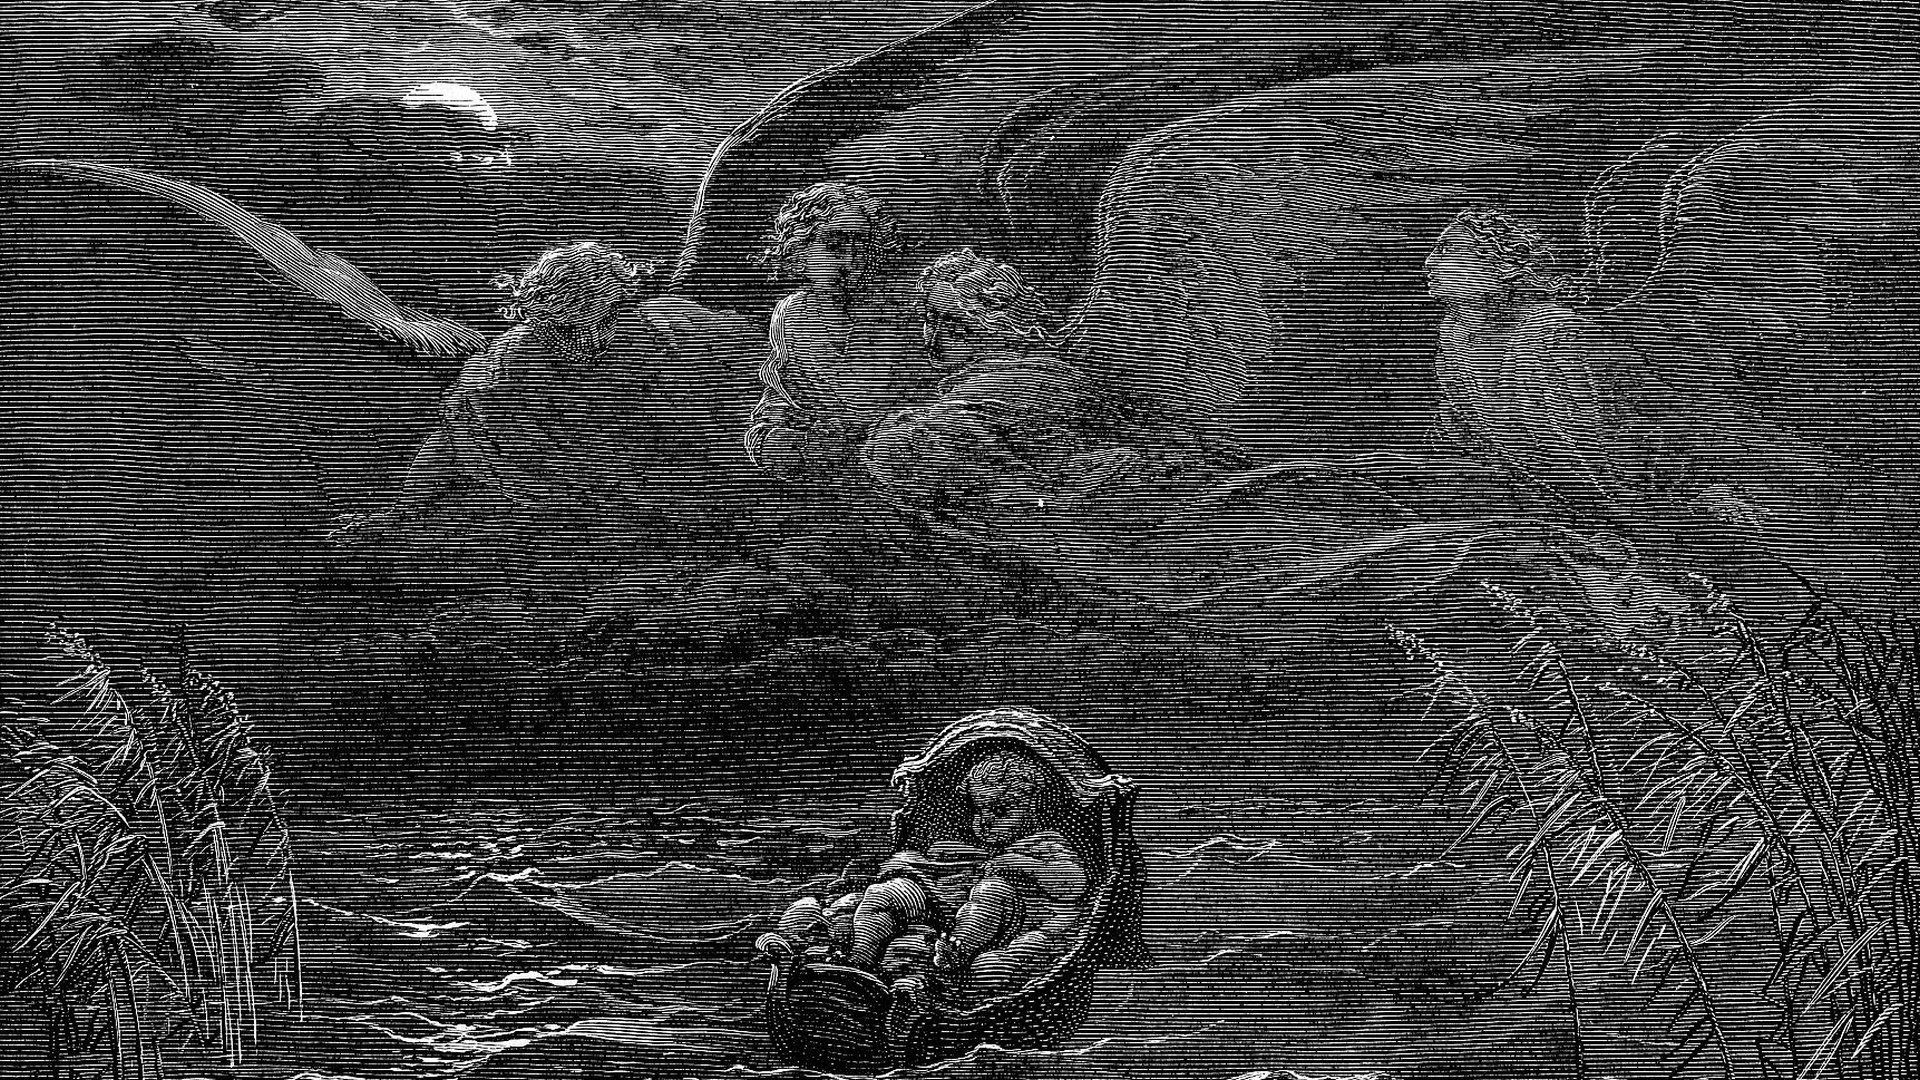 Related image. Gustave dore, Illustration, Wallpaper